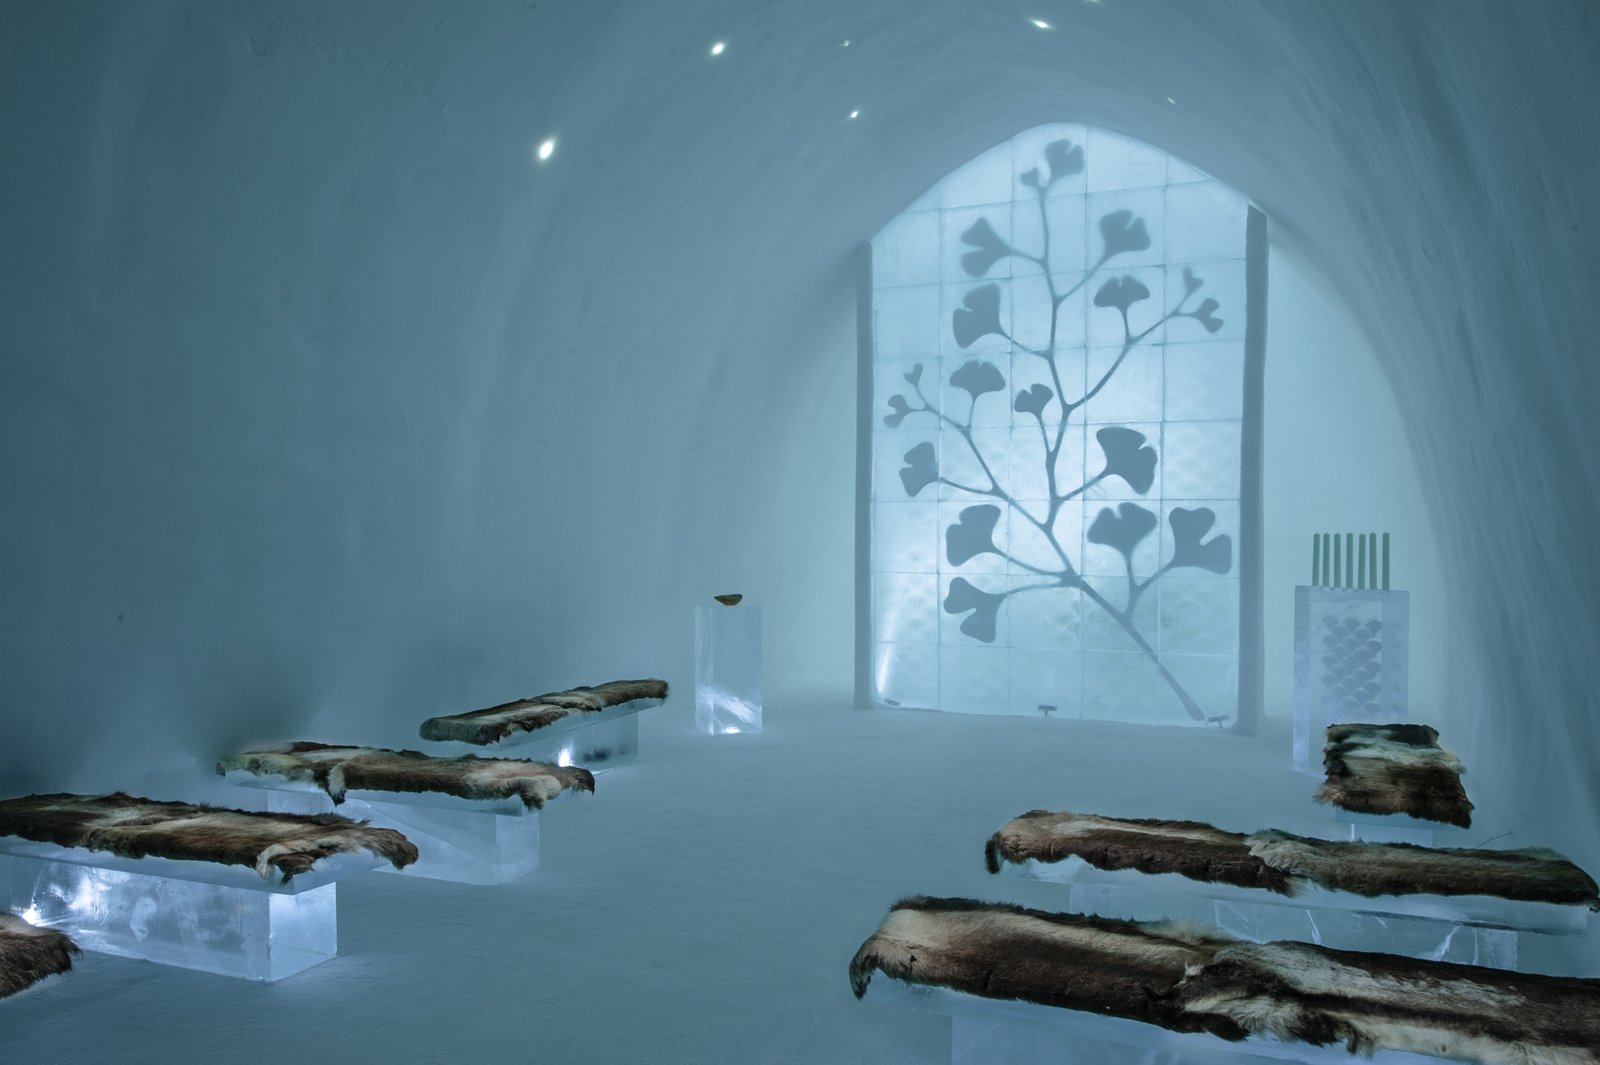 ❄️Check Out This Chilling Design at Sweden's Icehotel!